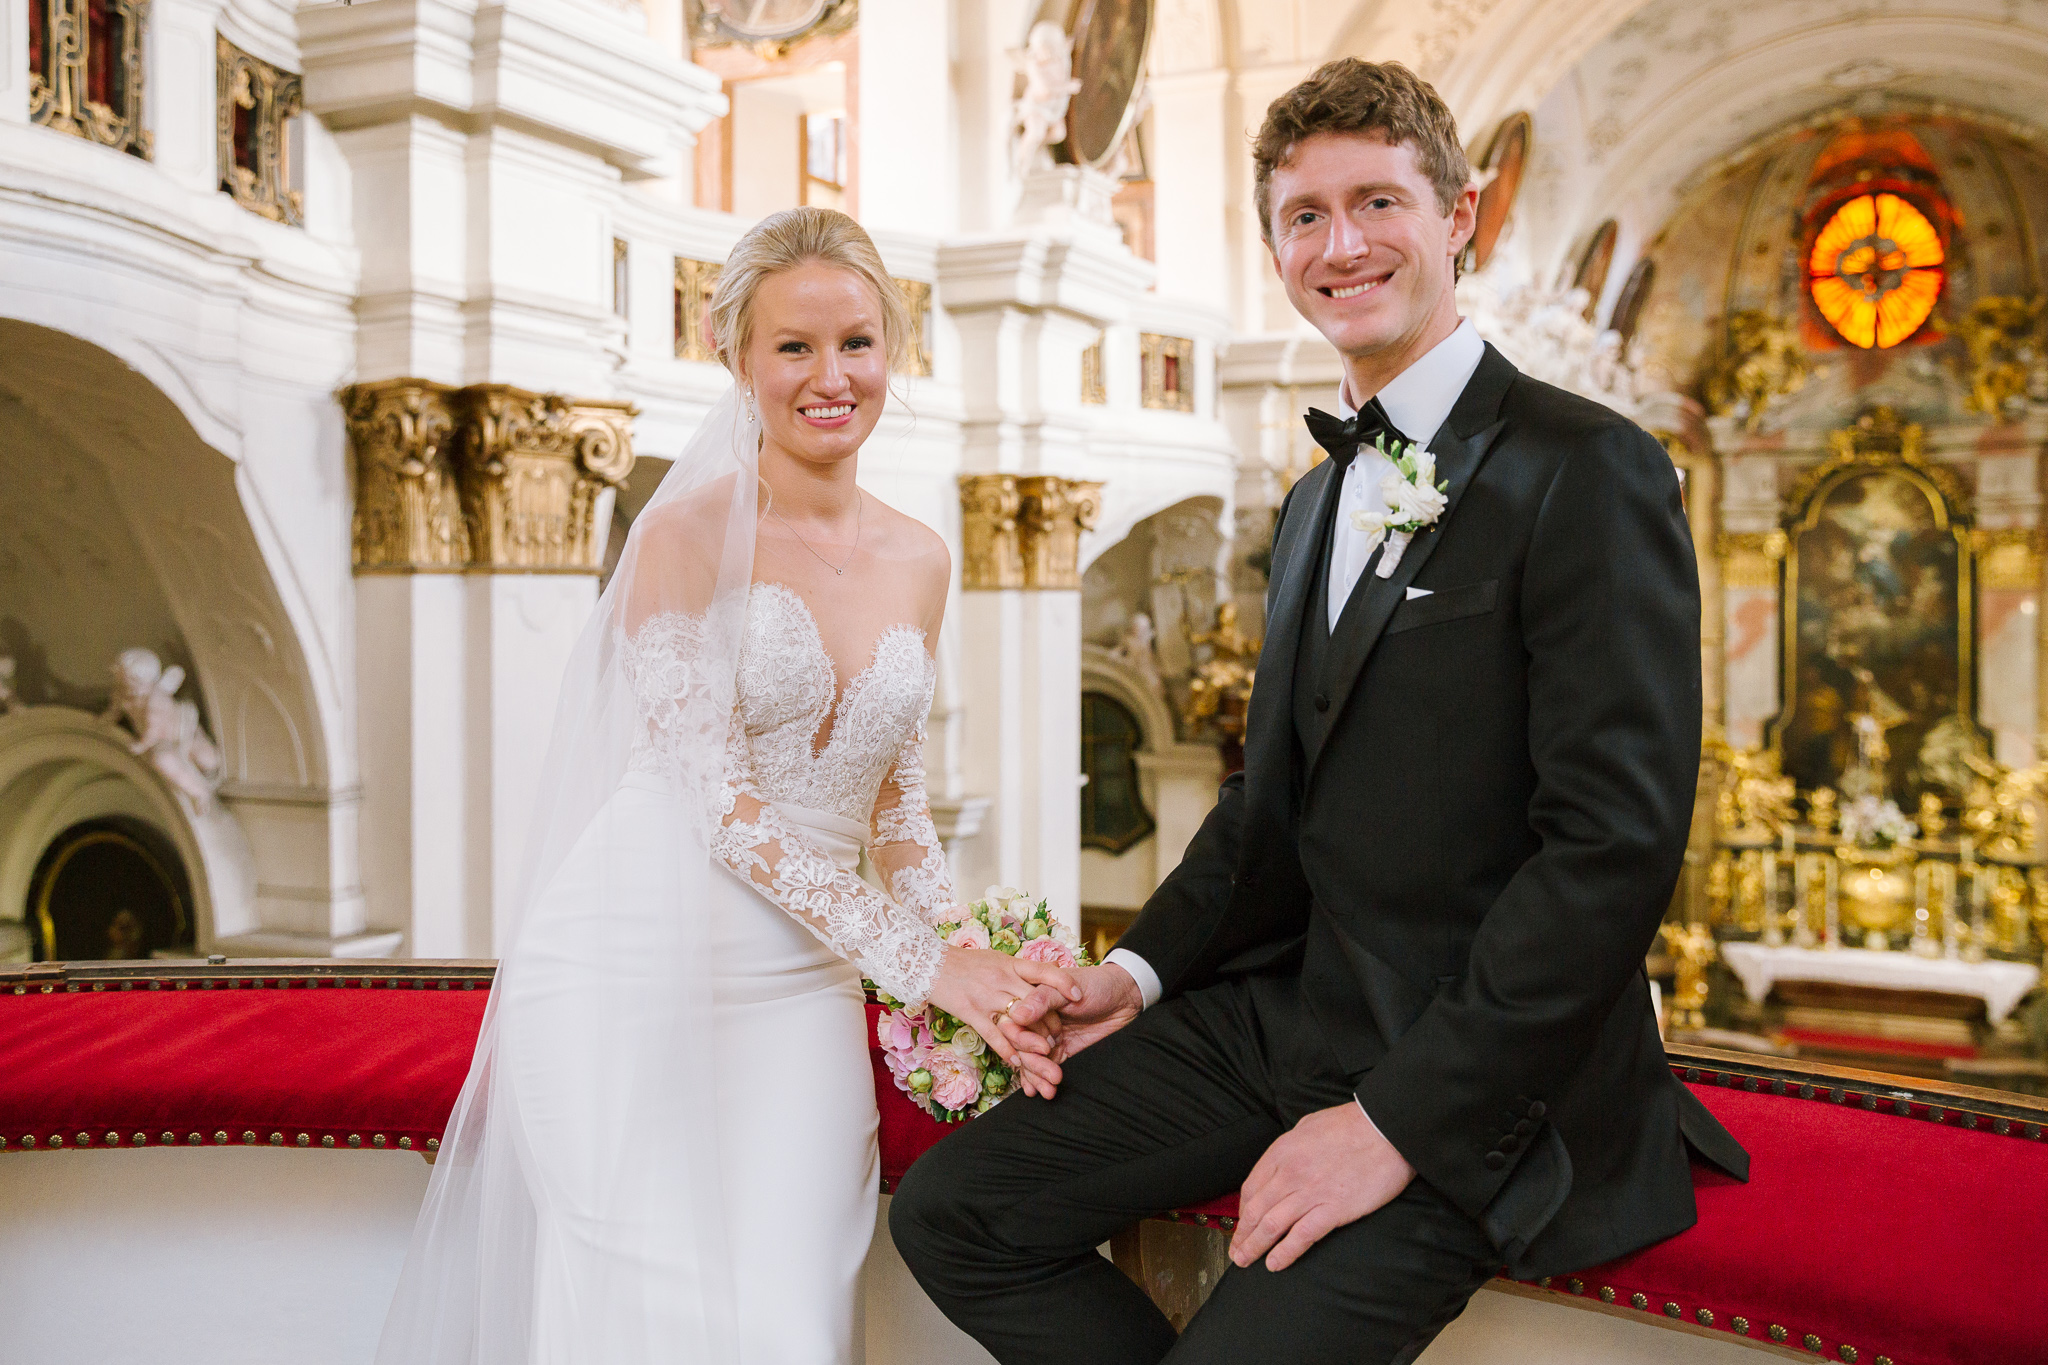 Bride and groom portrait in the church